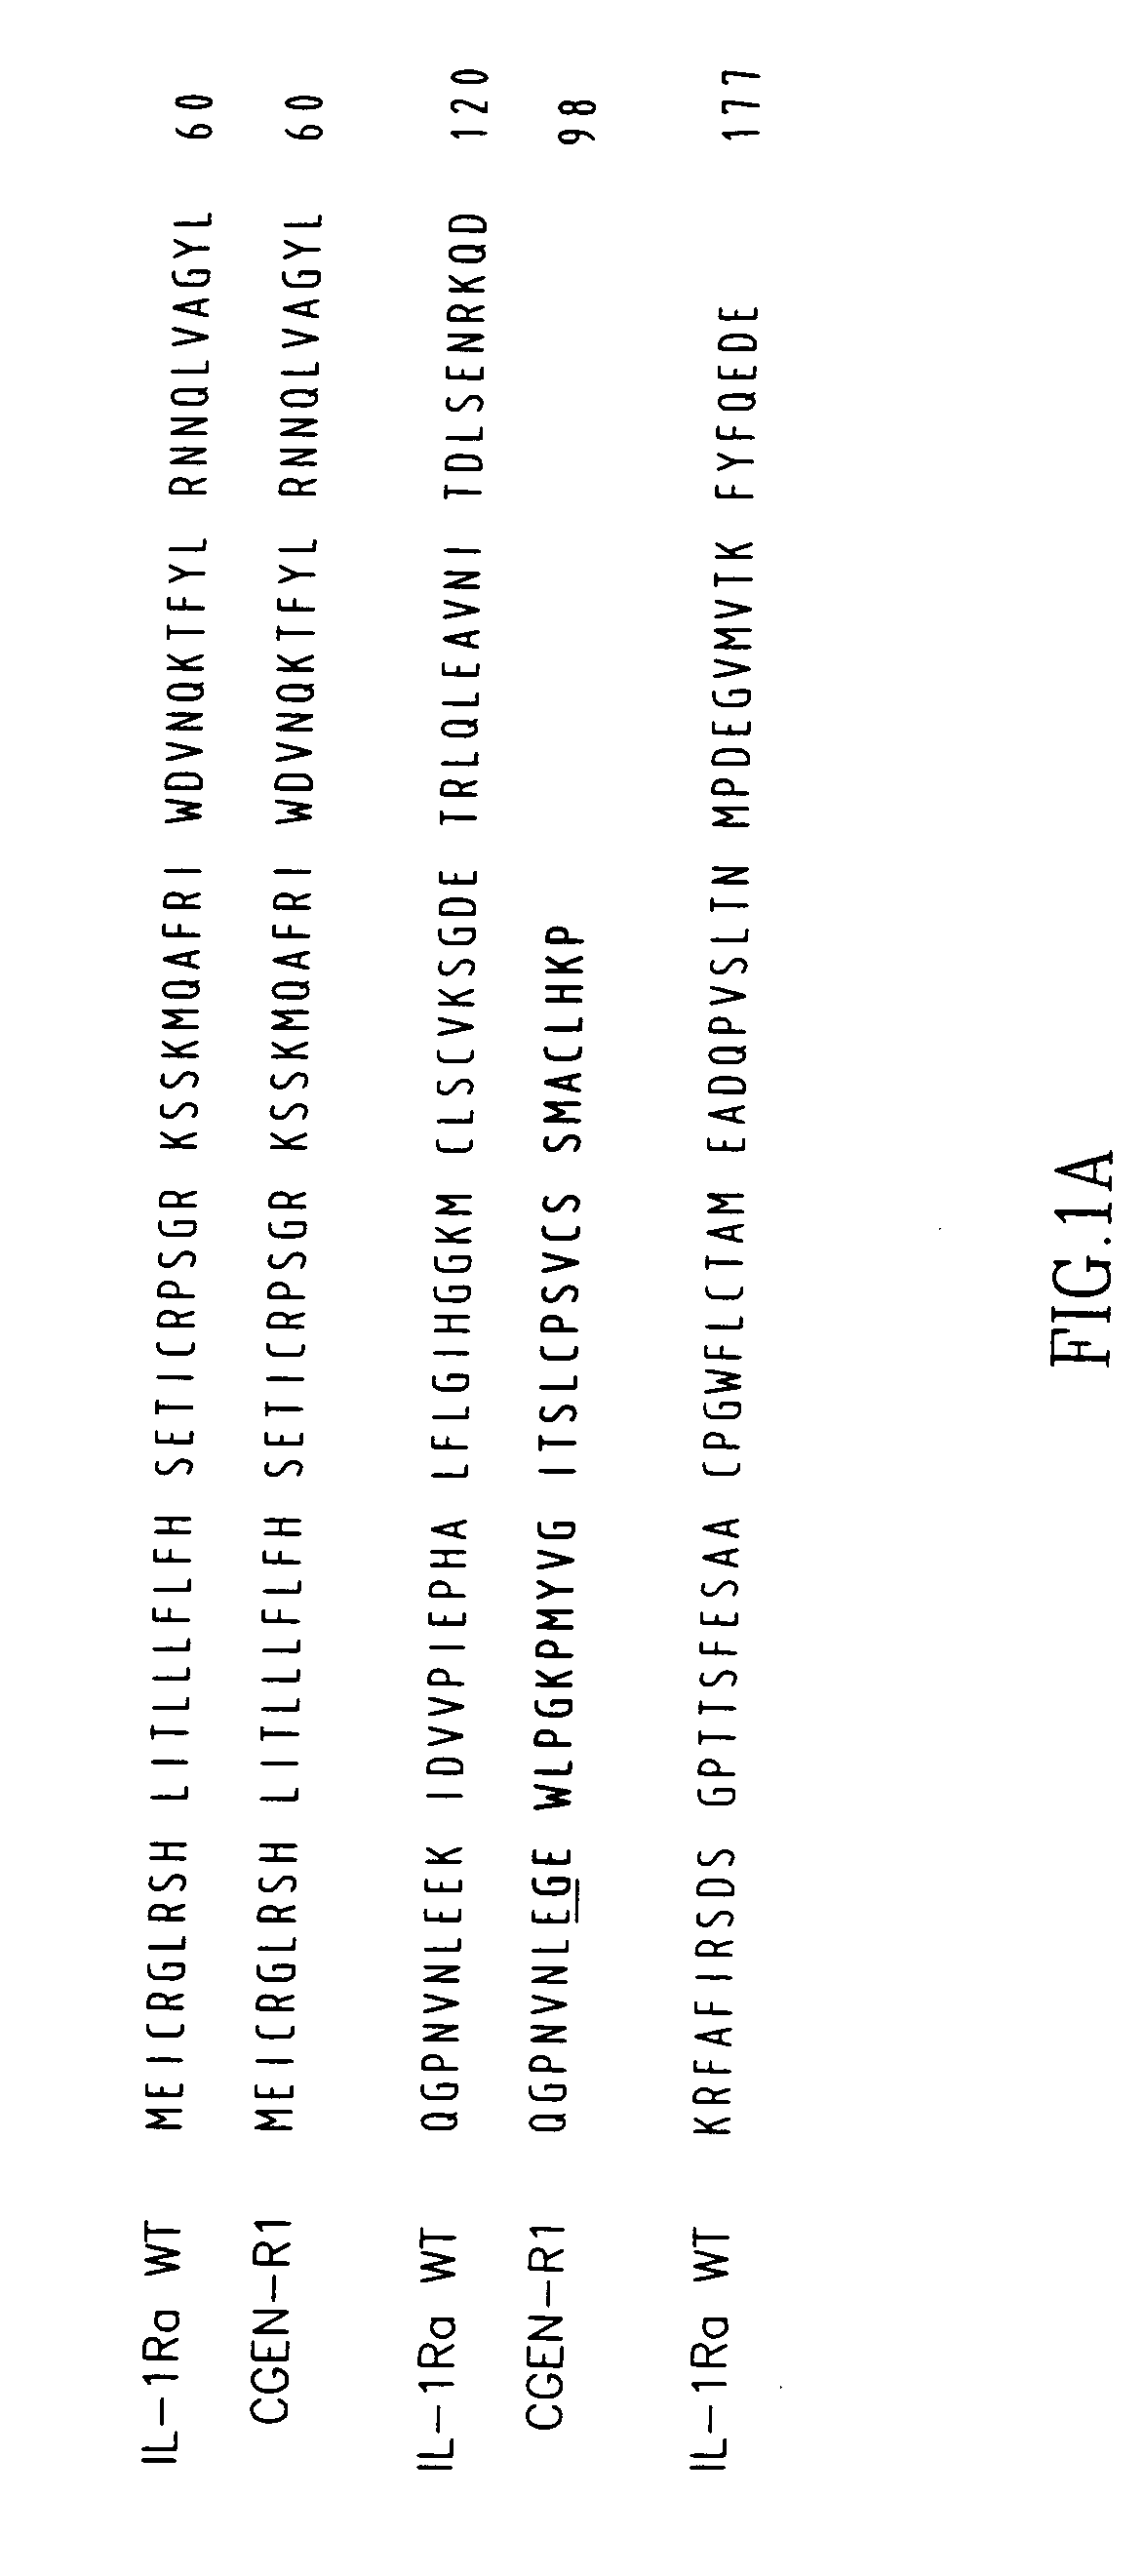 Variants of interleukin-1 receptor antagonist: compositions and uses thereof